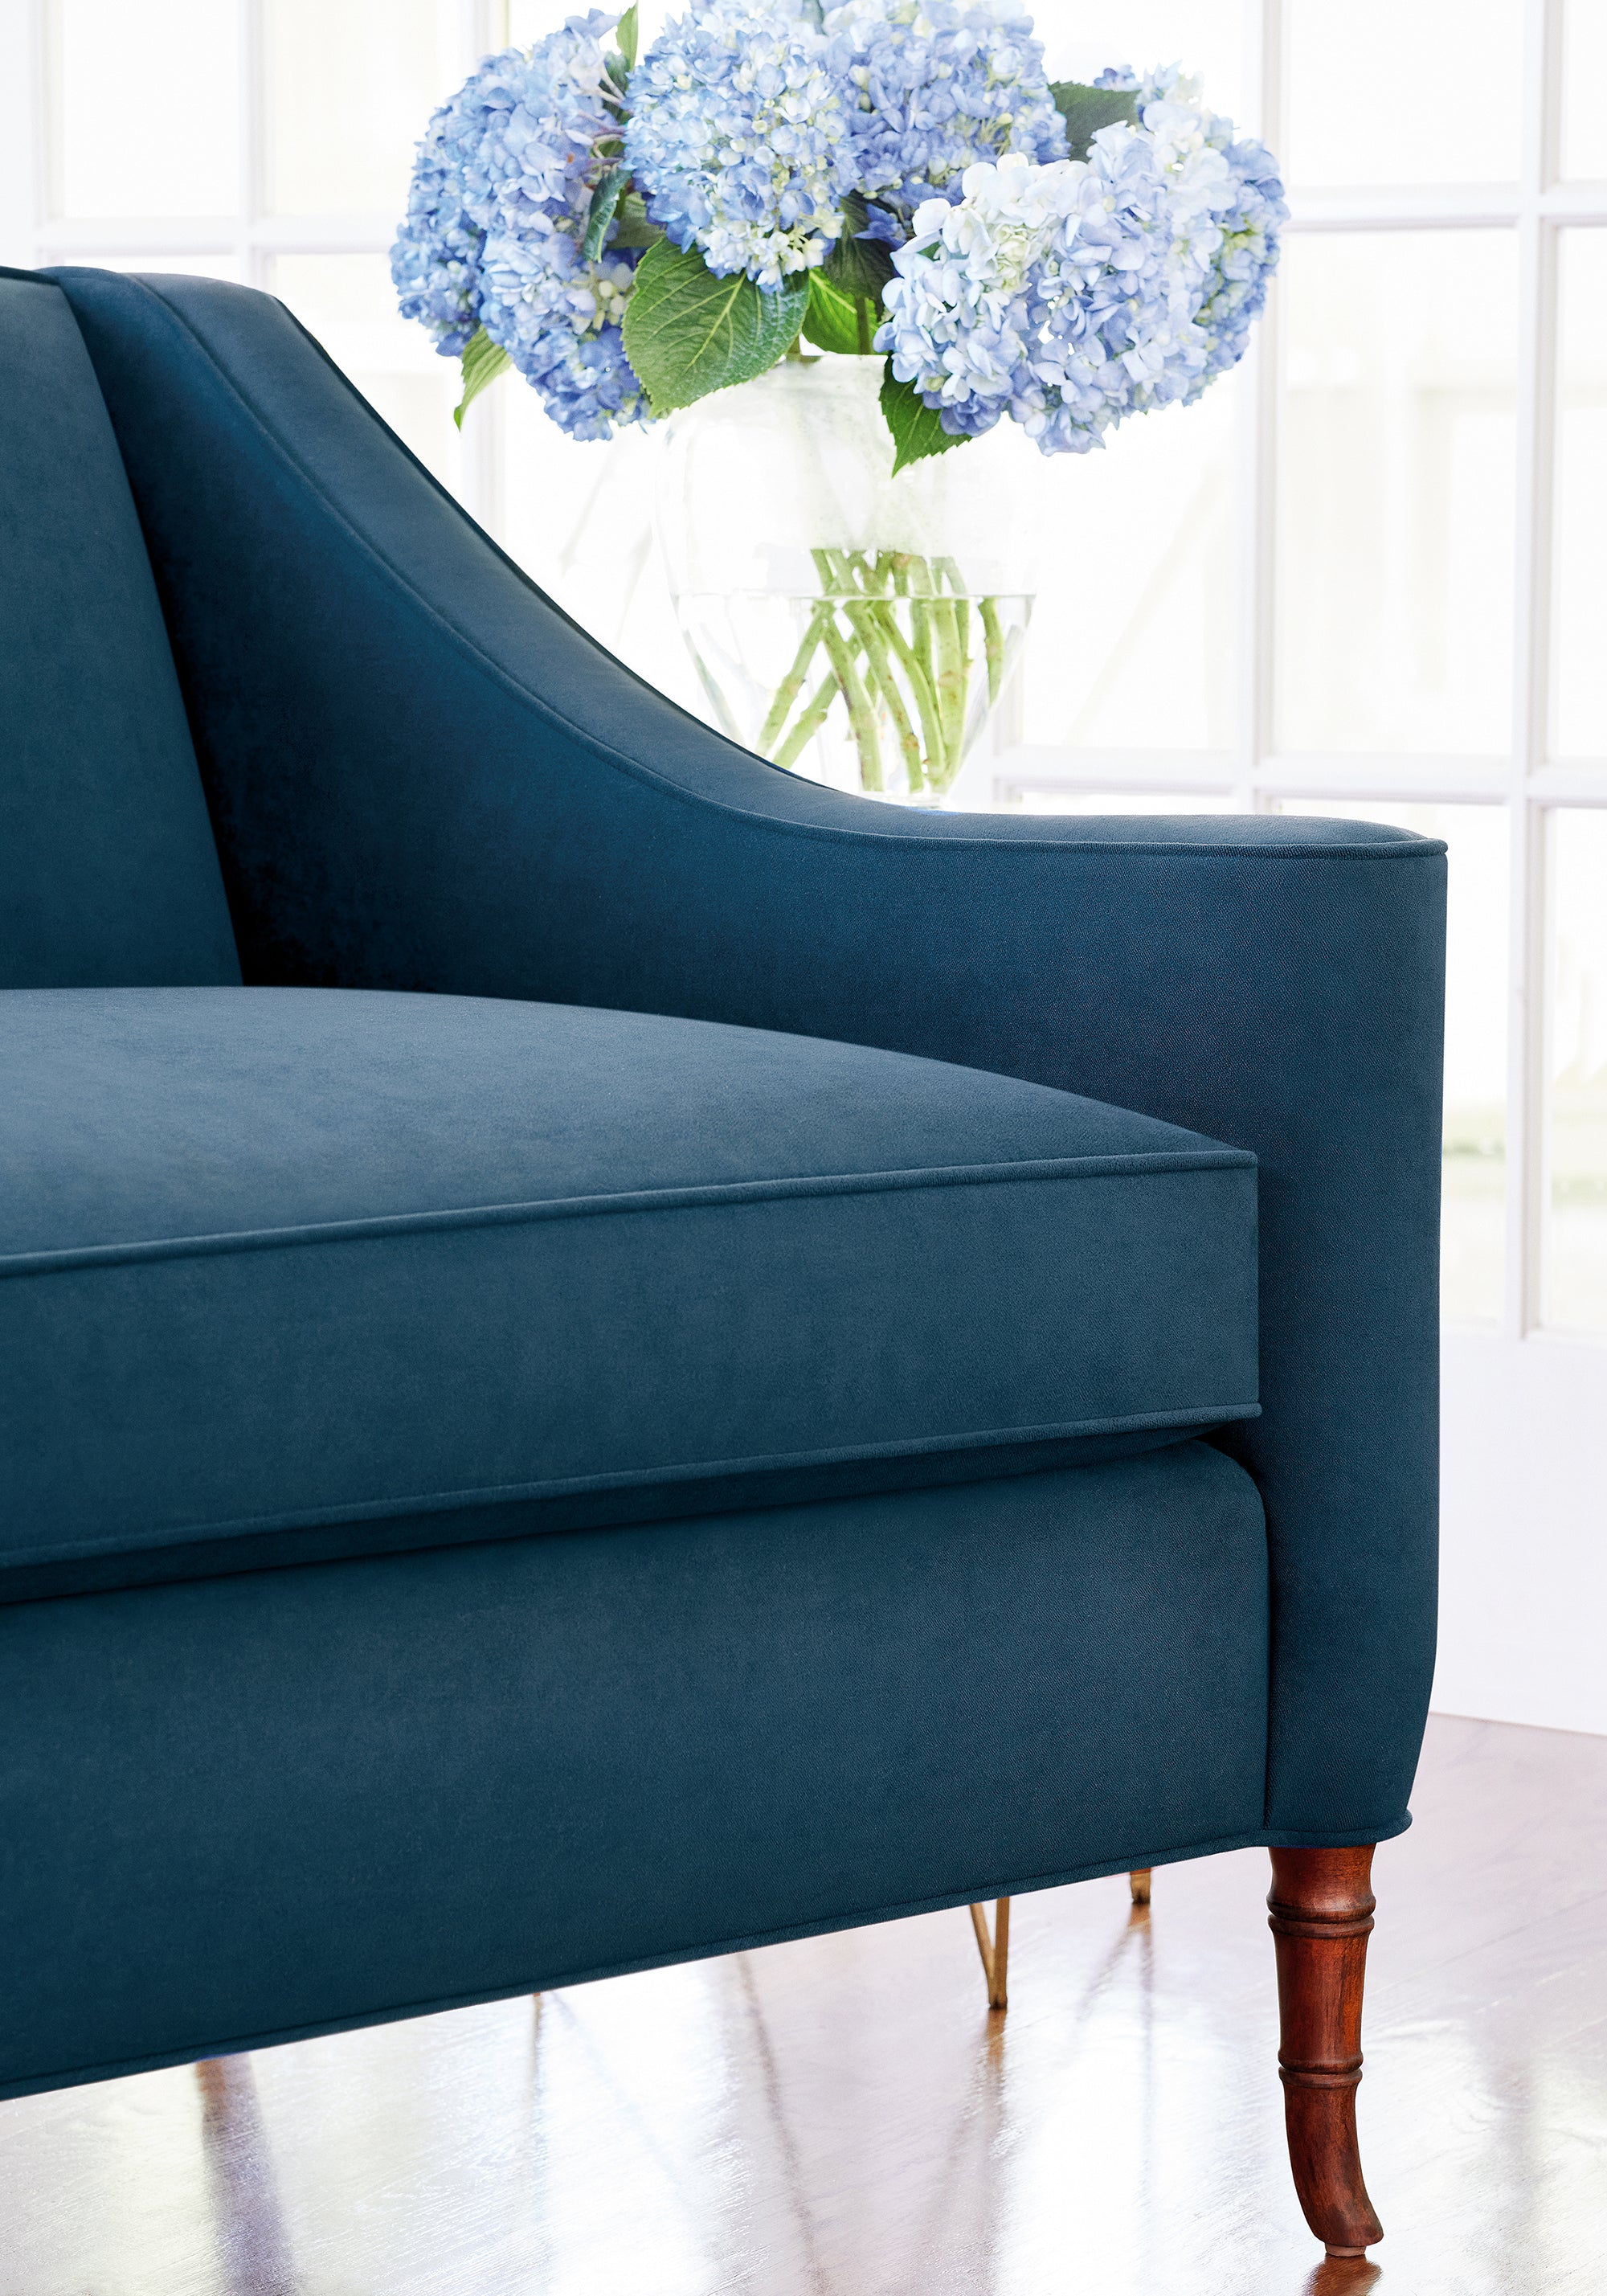 Brighton Settee in Club Velvet sustainable woven fabric in marine color - pattern number W7238 by Thibaut in the Club Velvet collection